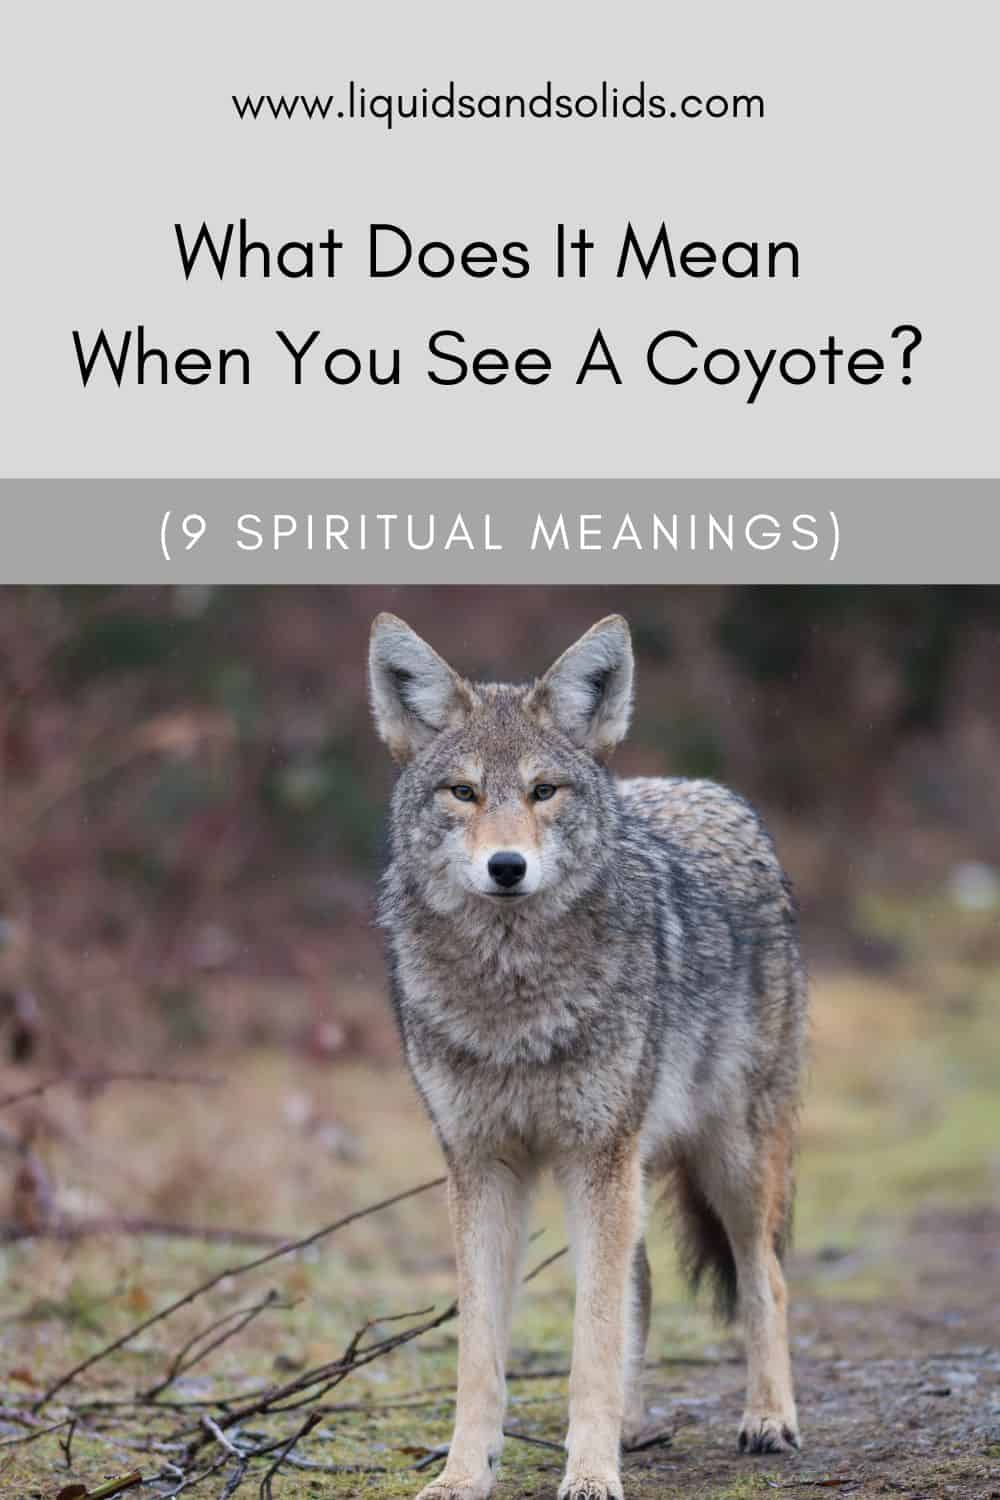 The Meaning Of Seeing A Coyote